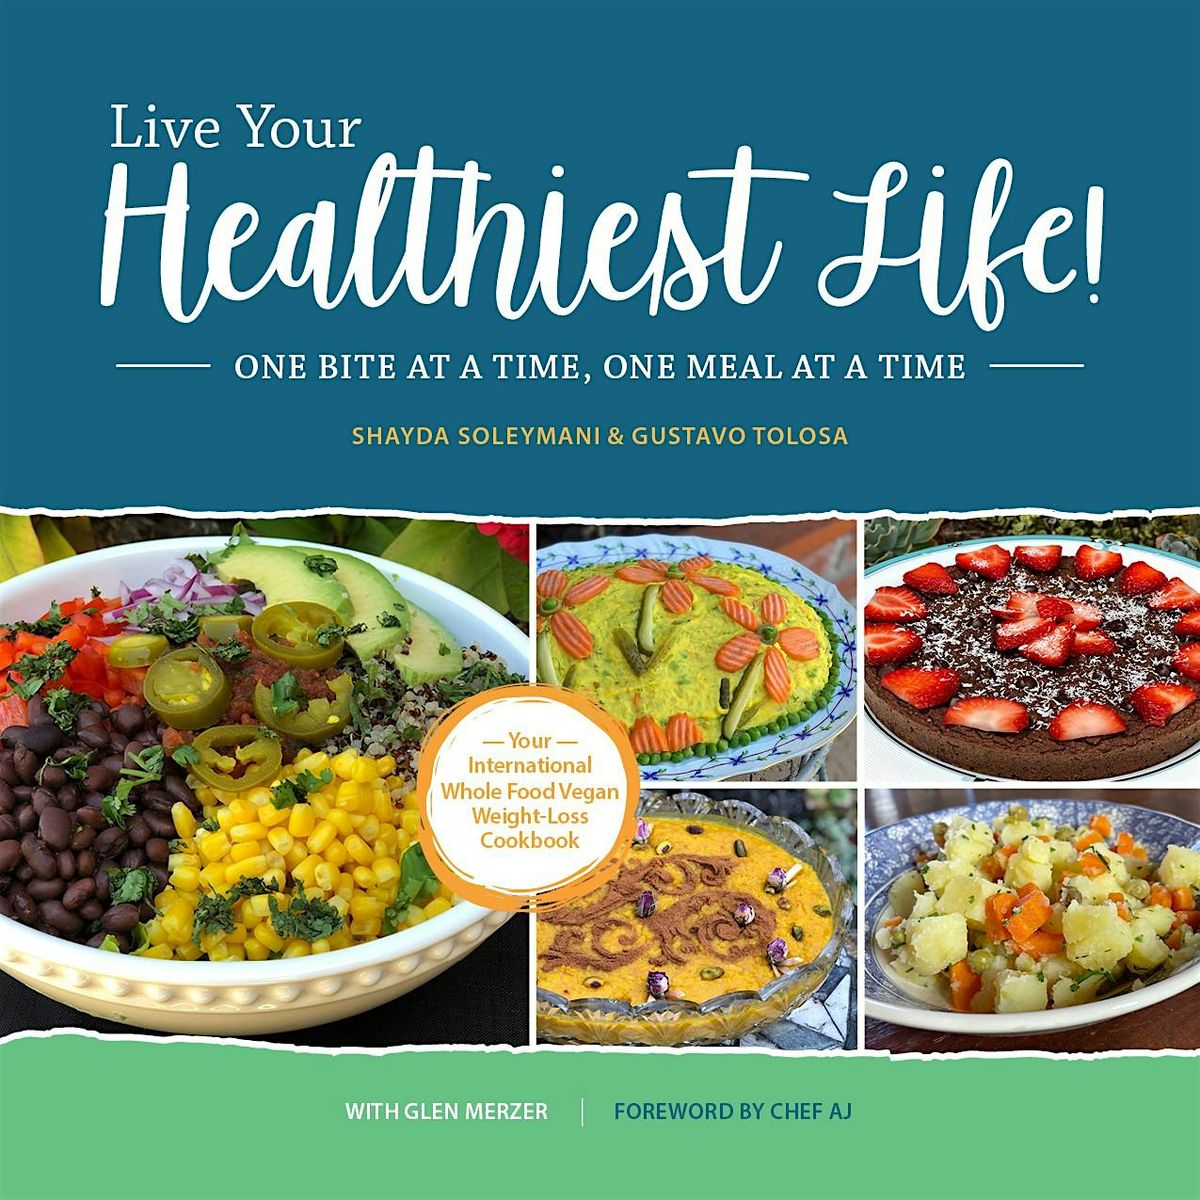 "Live Your Healthiest Life! " Book Release Party and Cooking Demo